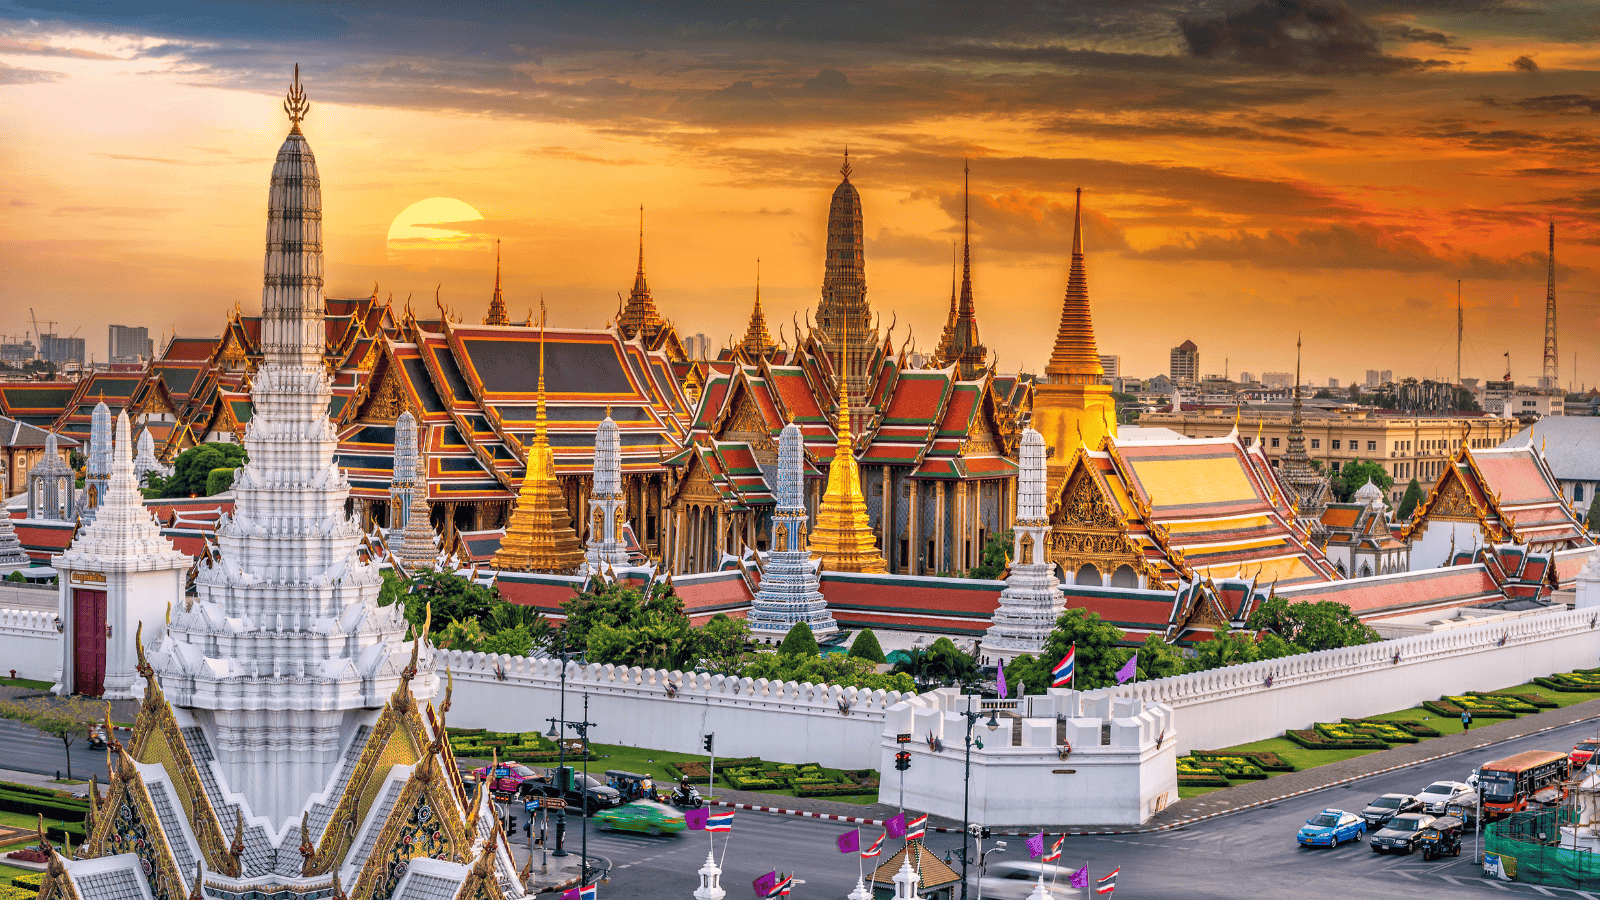 <p>Bangkok is a haven for top-tier cuisine, art, and history that rivals Dubai. Thailand’s capital has everything you need to relax or hit the ground running.</p><p>Don’t miss the Chatuchak Weekend Market, one of the best food <a href="https://whatthefab.com/local-markets-around-the-world.html" rel="follow">markets worldwide</a>. Visit the numerous religious temples and admire the sprawling network of canals to journey into Bangkok’s storied past.</p>